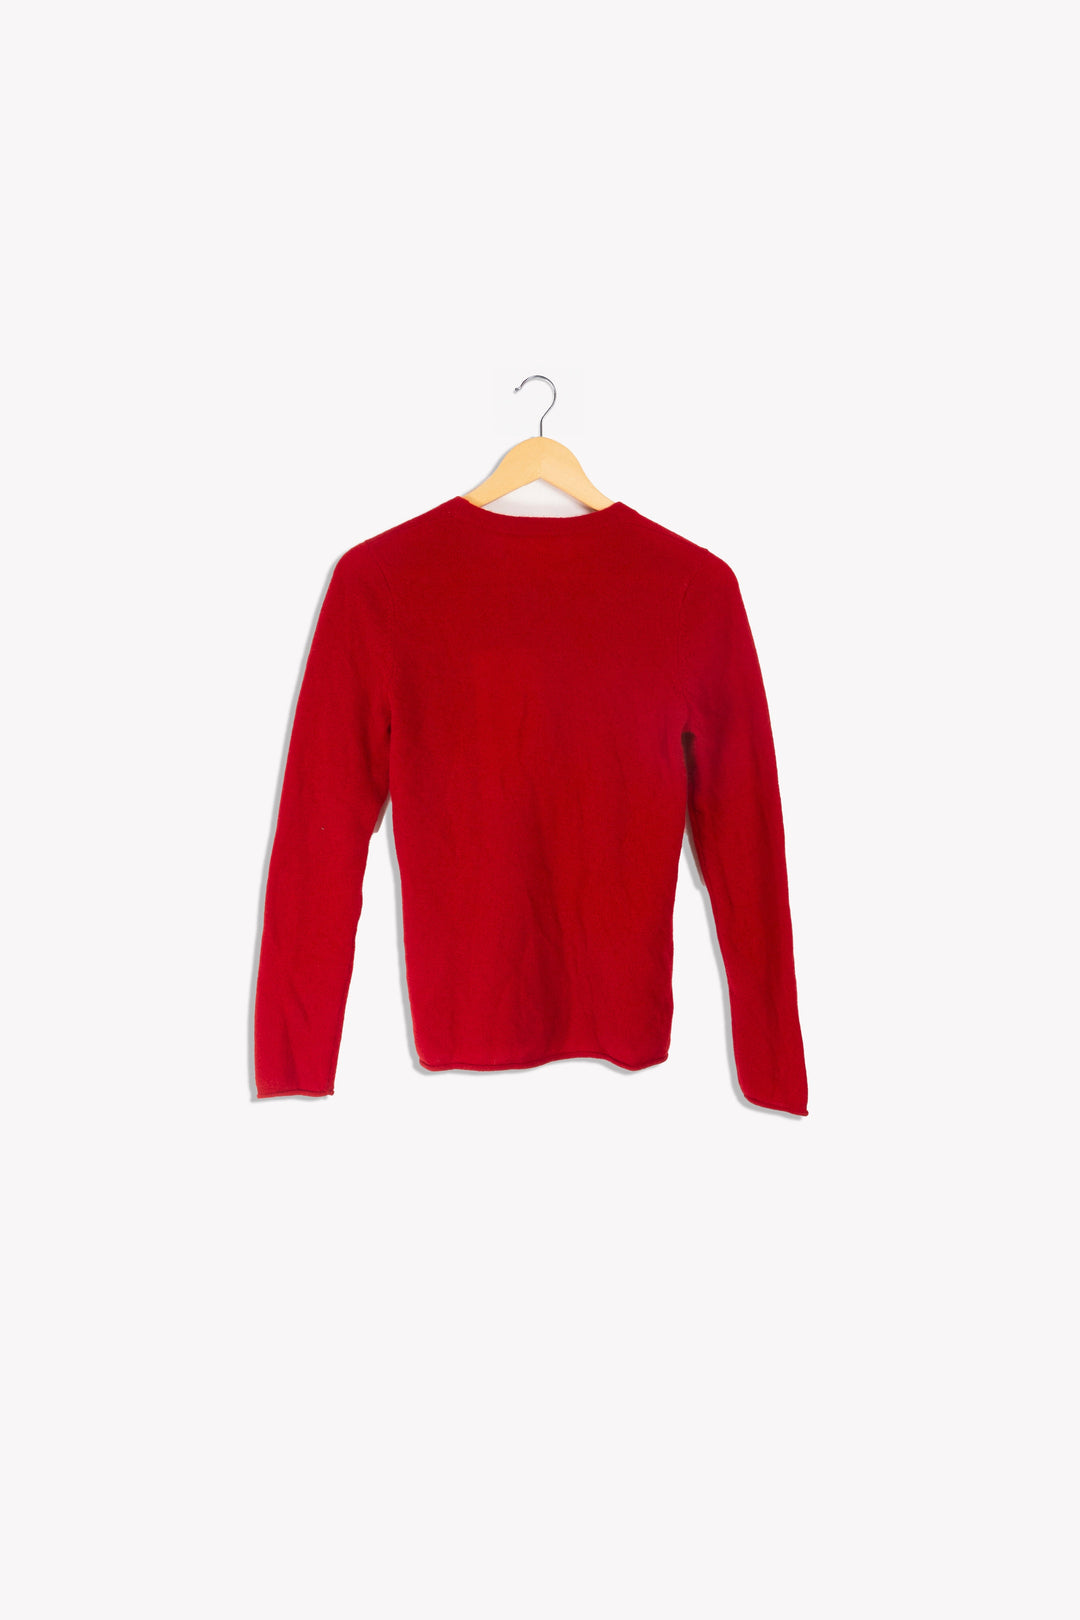 Red sweater - S